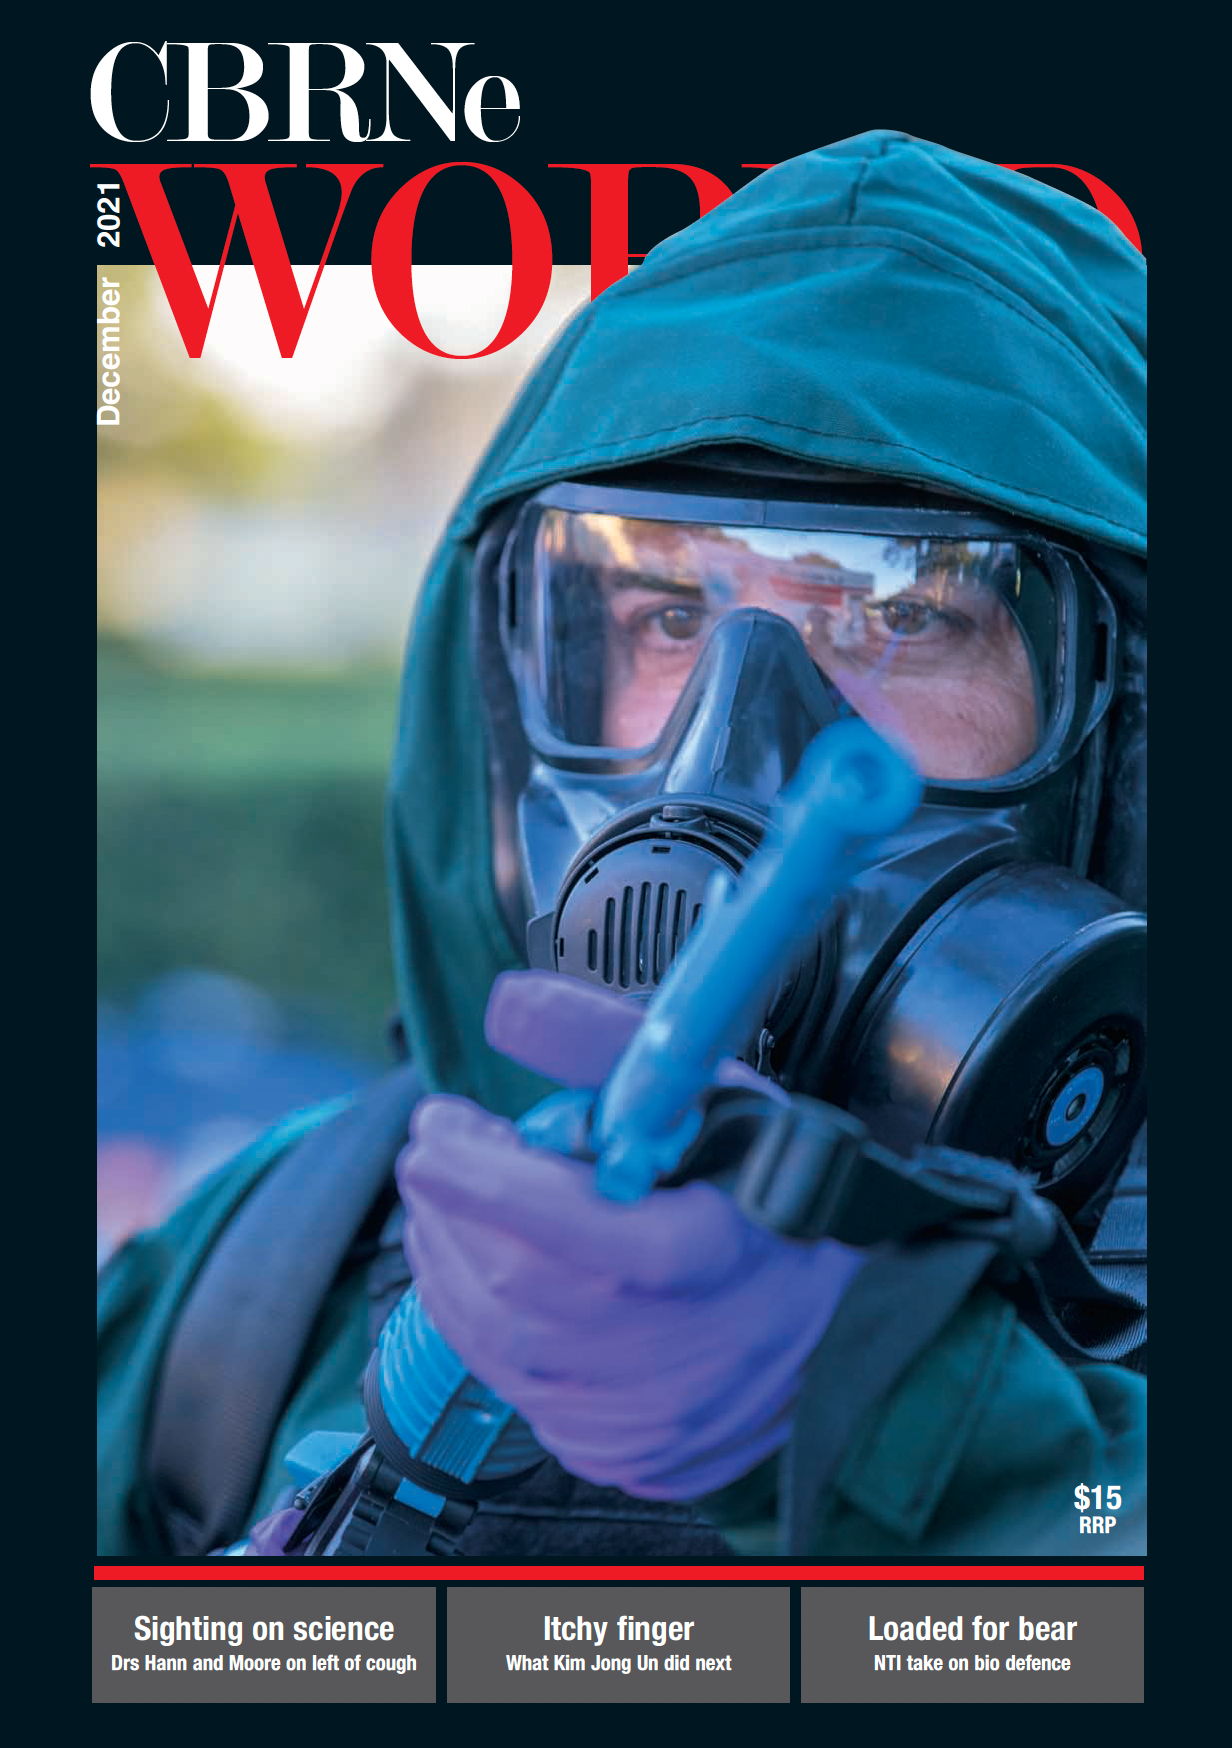 CBRNe World : C. Baxter about threat evolution and detection equipment to consider.